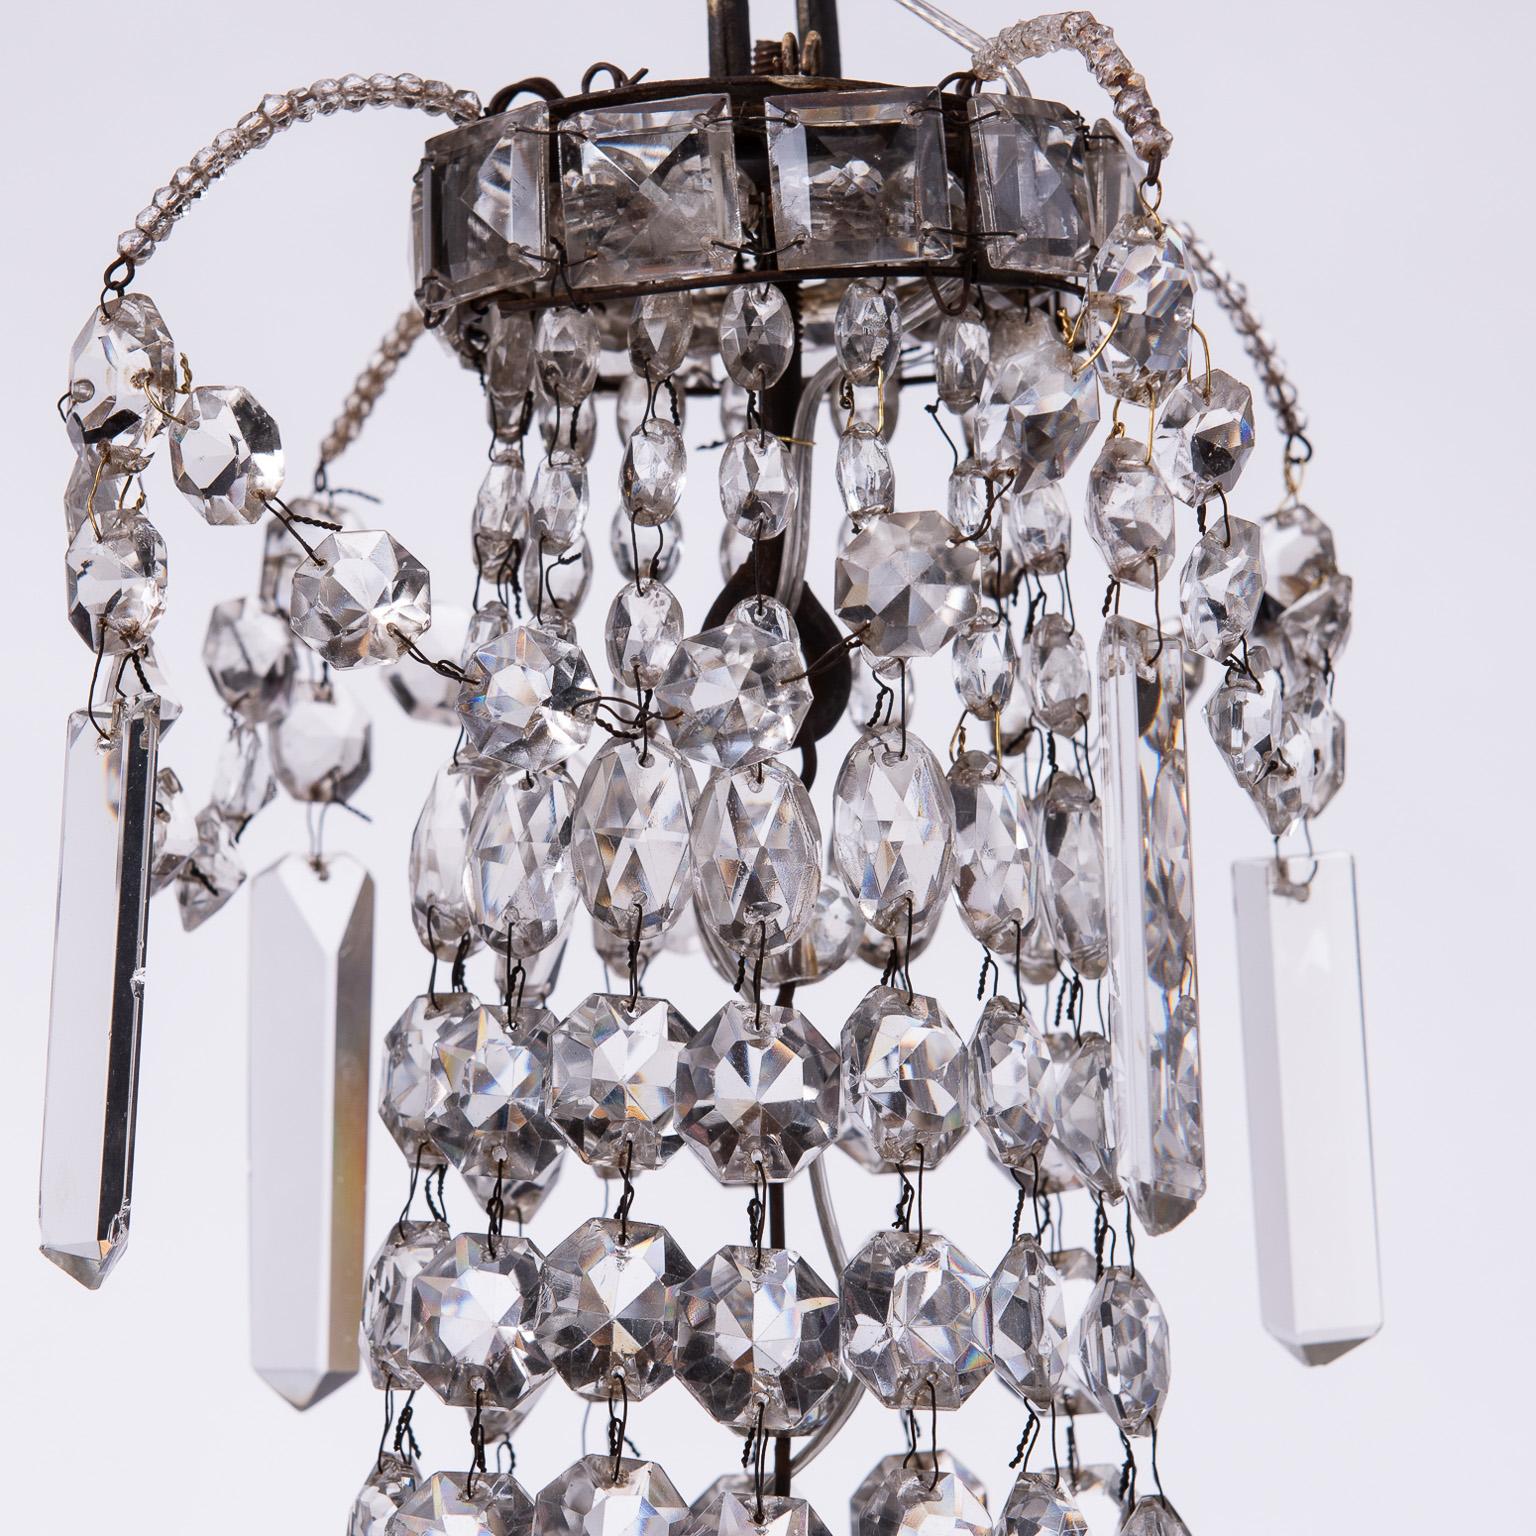 This Classic French chandelier is made particularly glamorous by a ring of super long crystals at the center, which refract the light beautifully. It has three interior lights and was recently wired for American circuits.

Measures: 35” high
19”